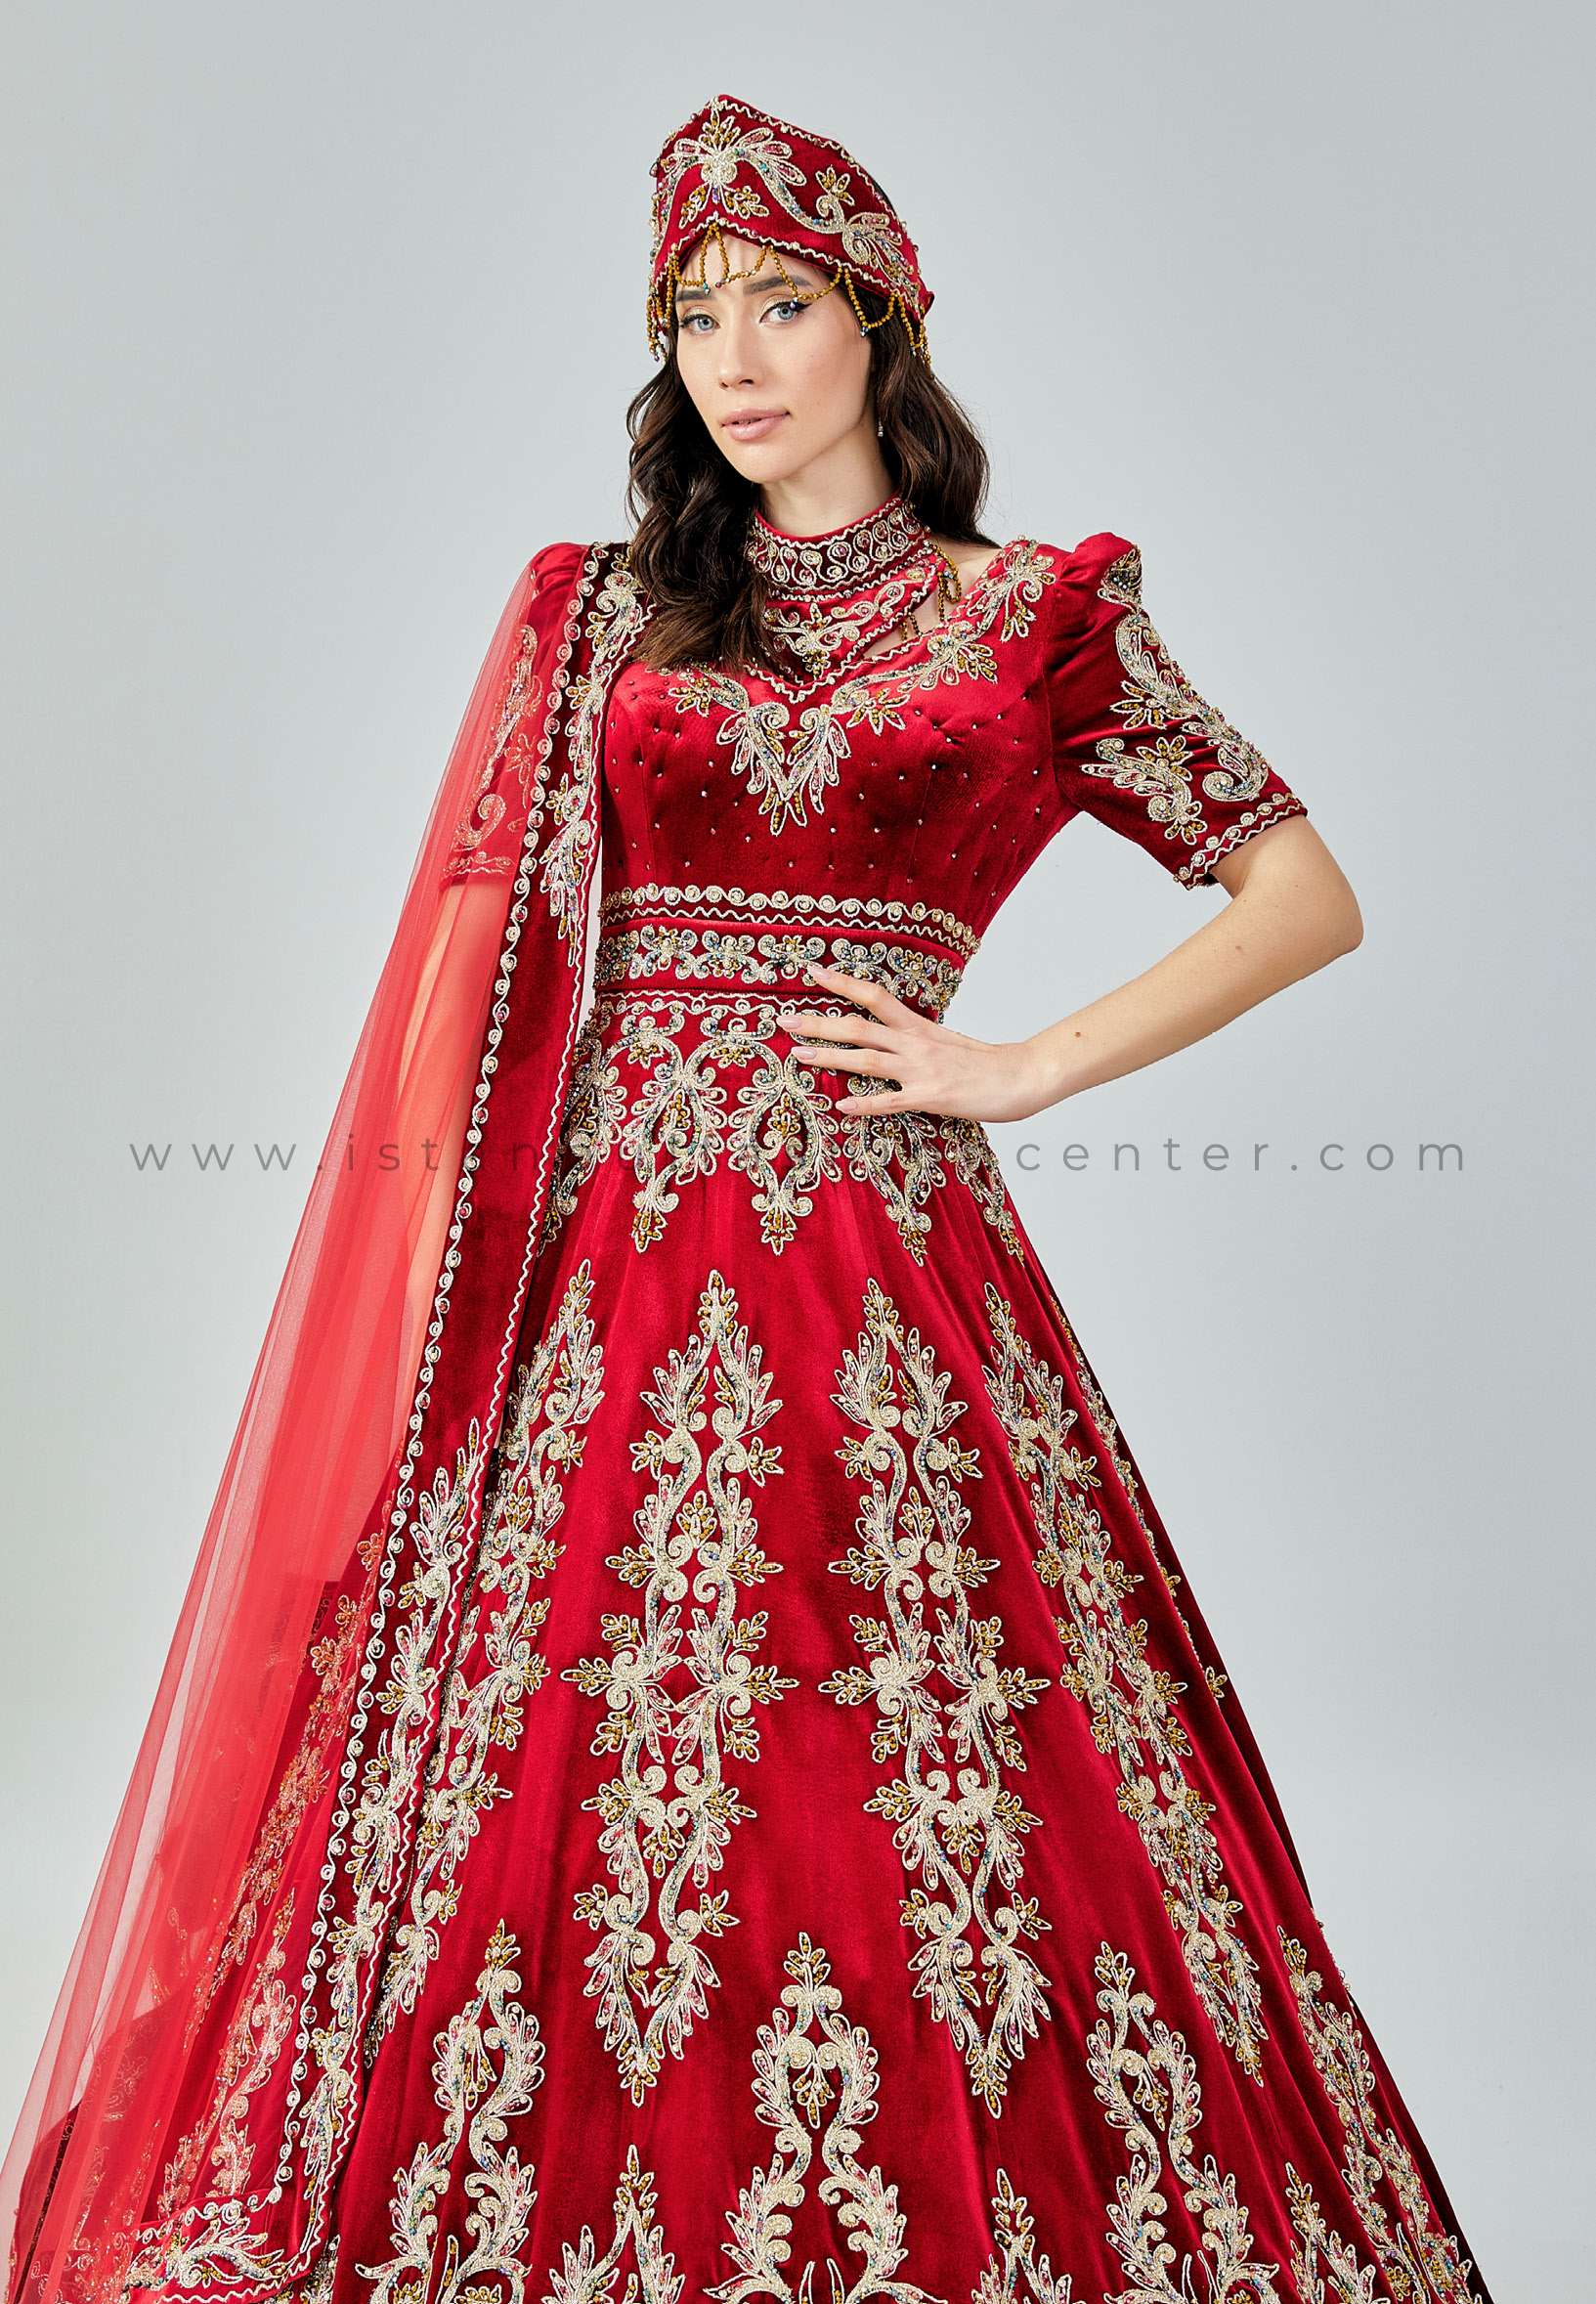 Buy Bright Red Princess Wedding Dress With Unique Neck Design, Made to  Measure Luxury Red Bridal Ball Gown Online in India - Etsy